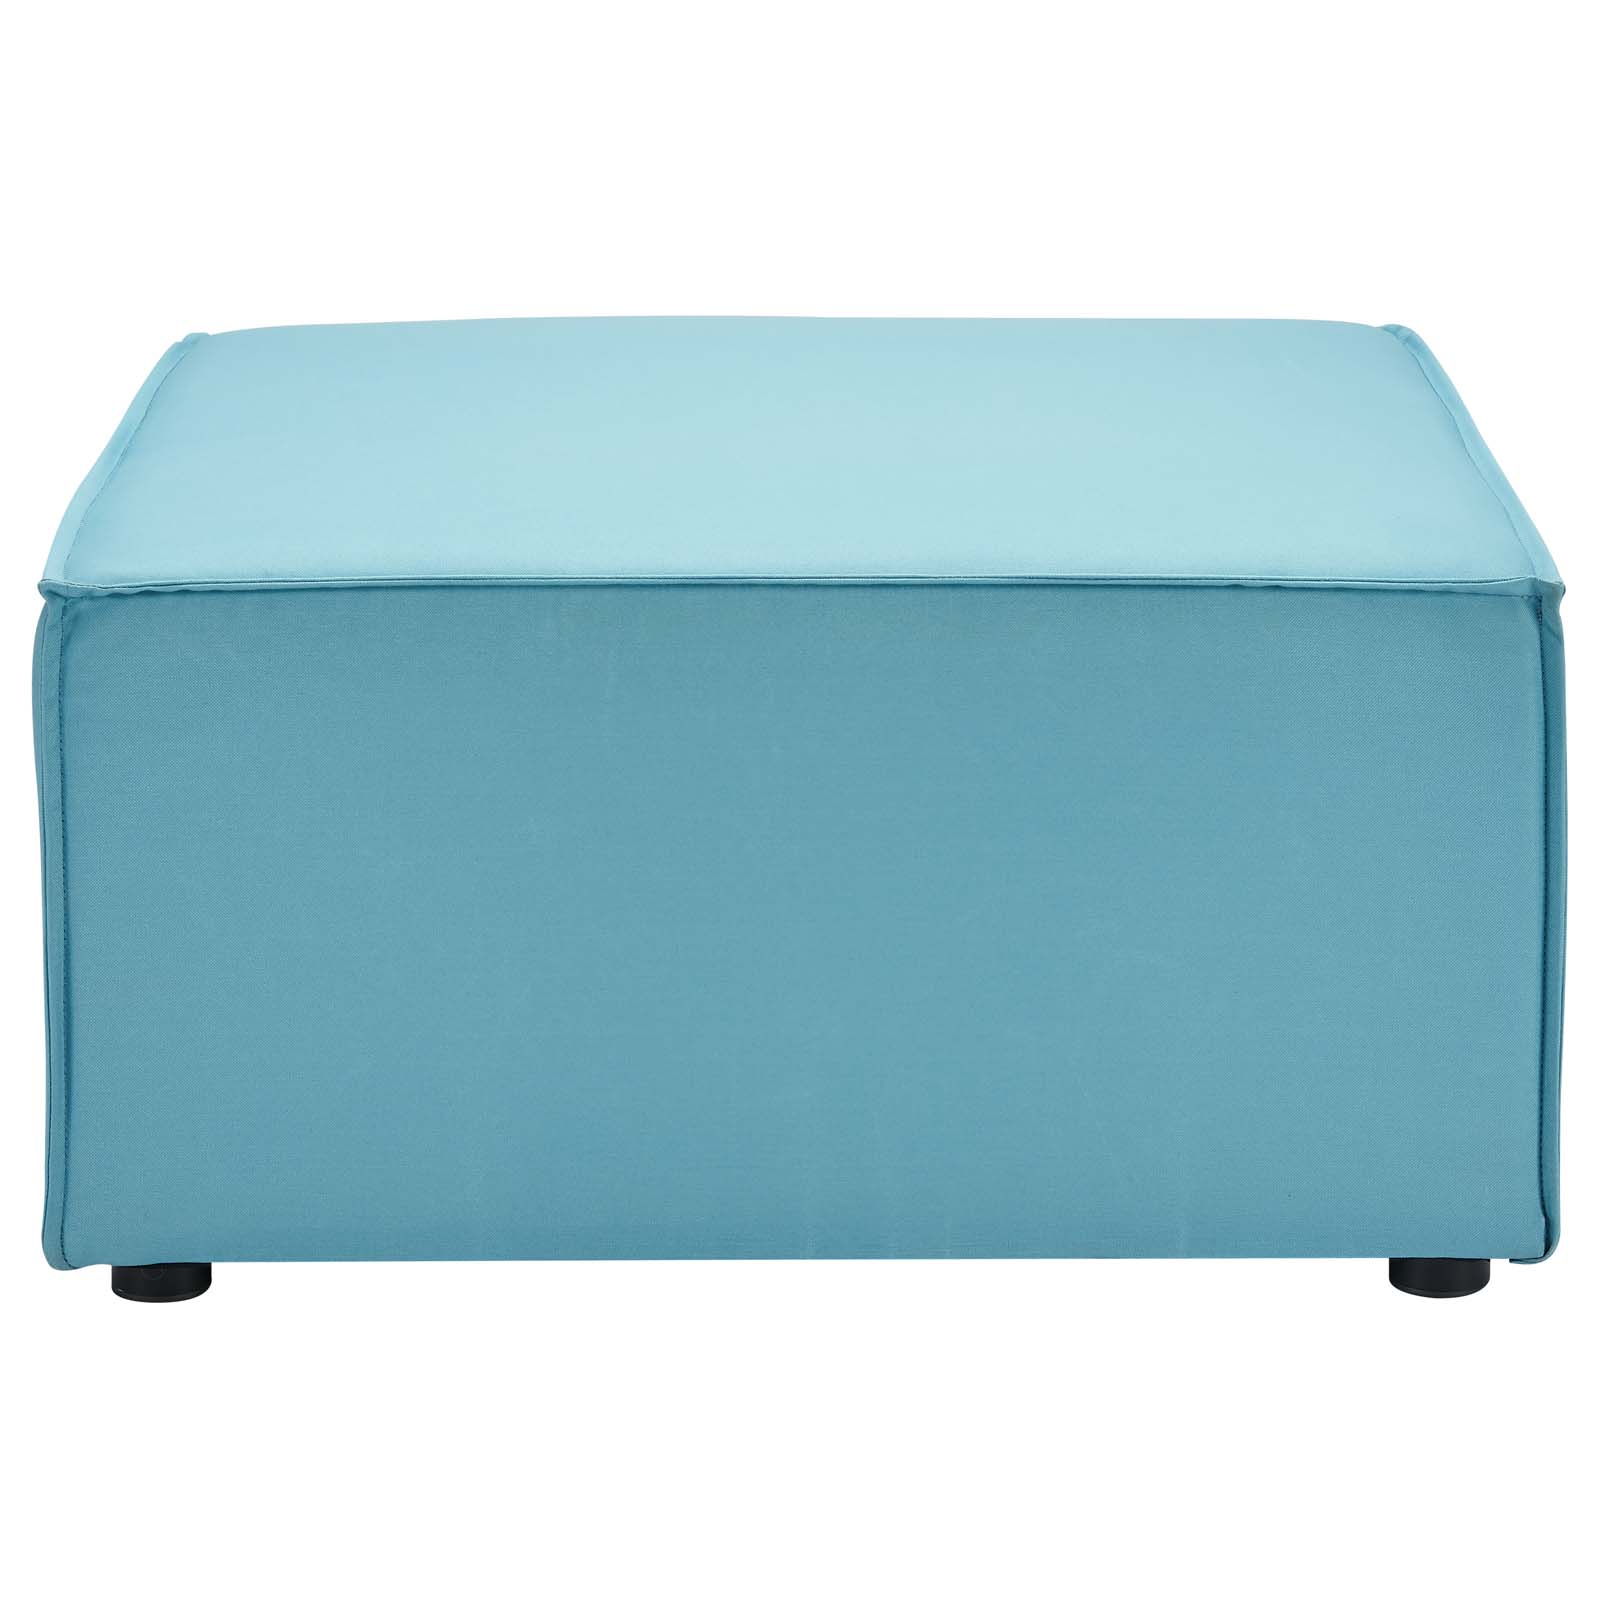 Lounge Chair Ottoman, Fabric, Blue, Modern Contemporary Urban Design, Outdoor Patio Balcony Cafe Bistro Garden Furniture Hotel Hospitality - image 2 of 6